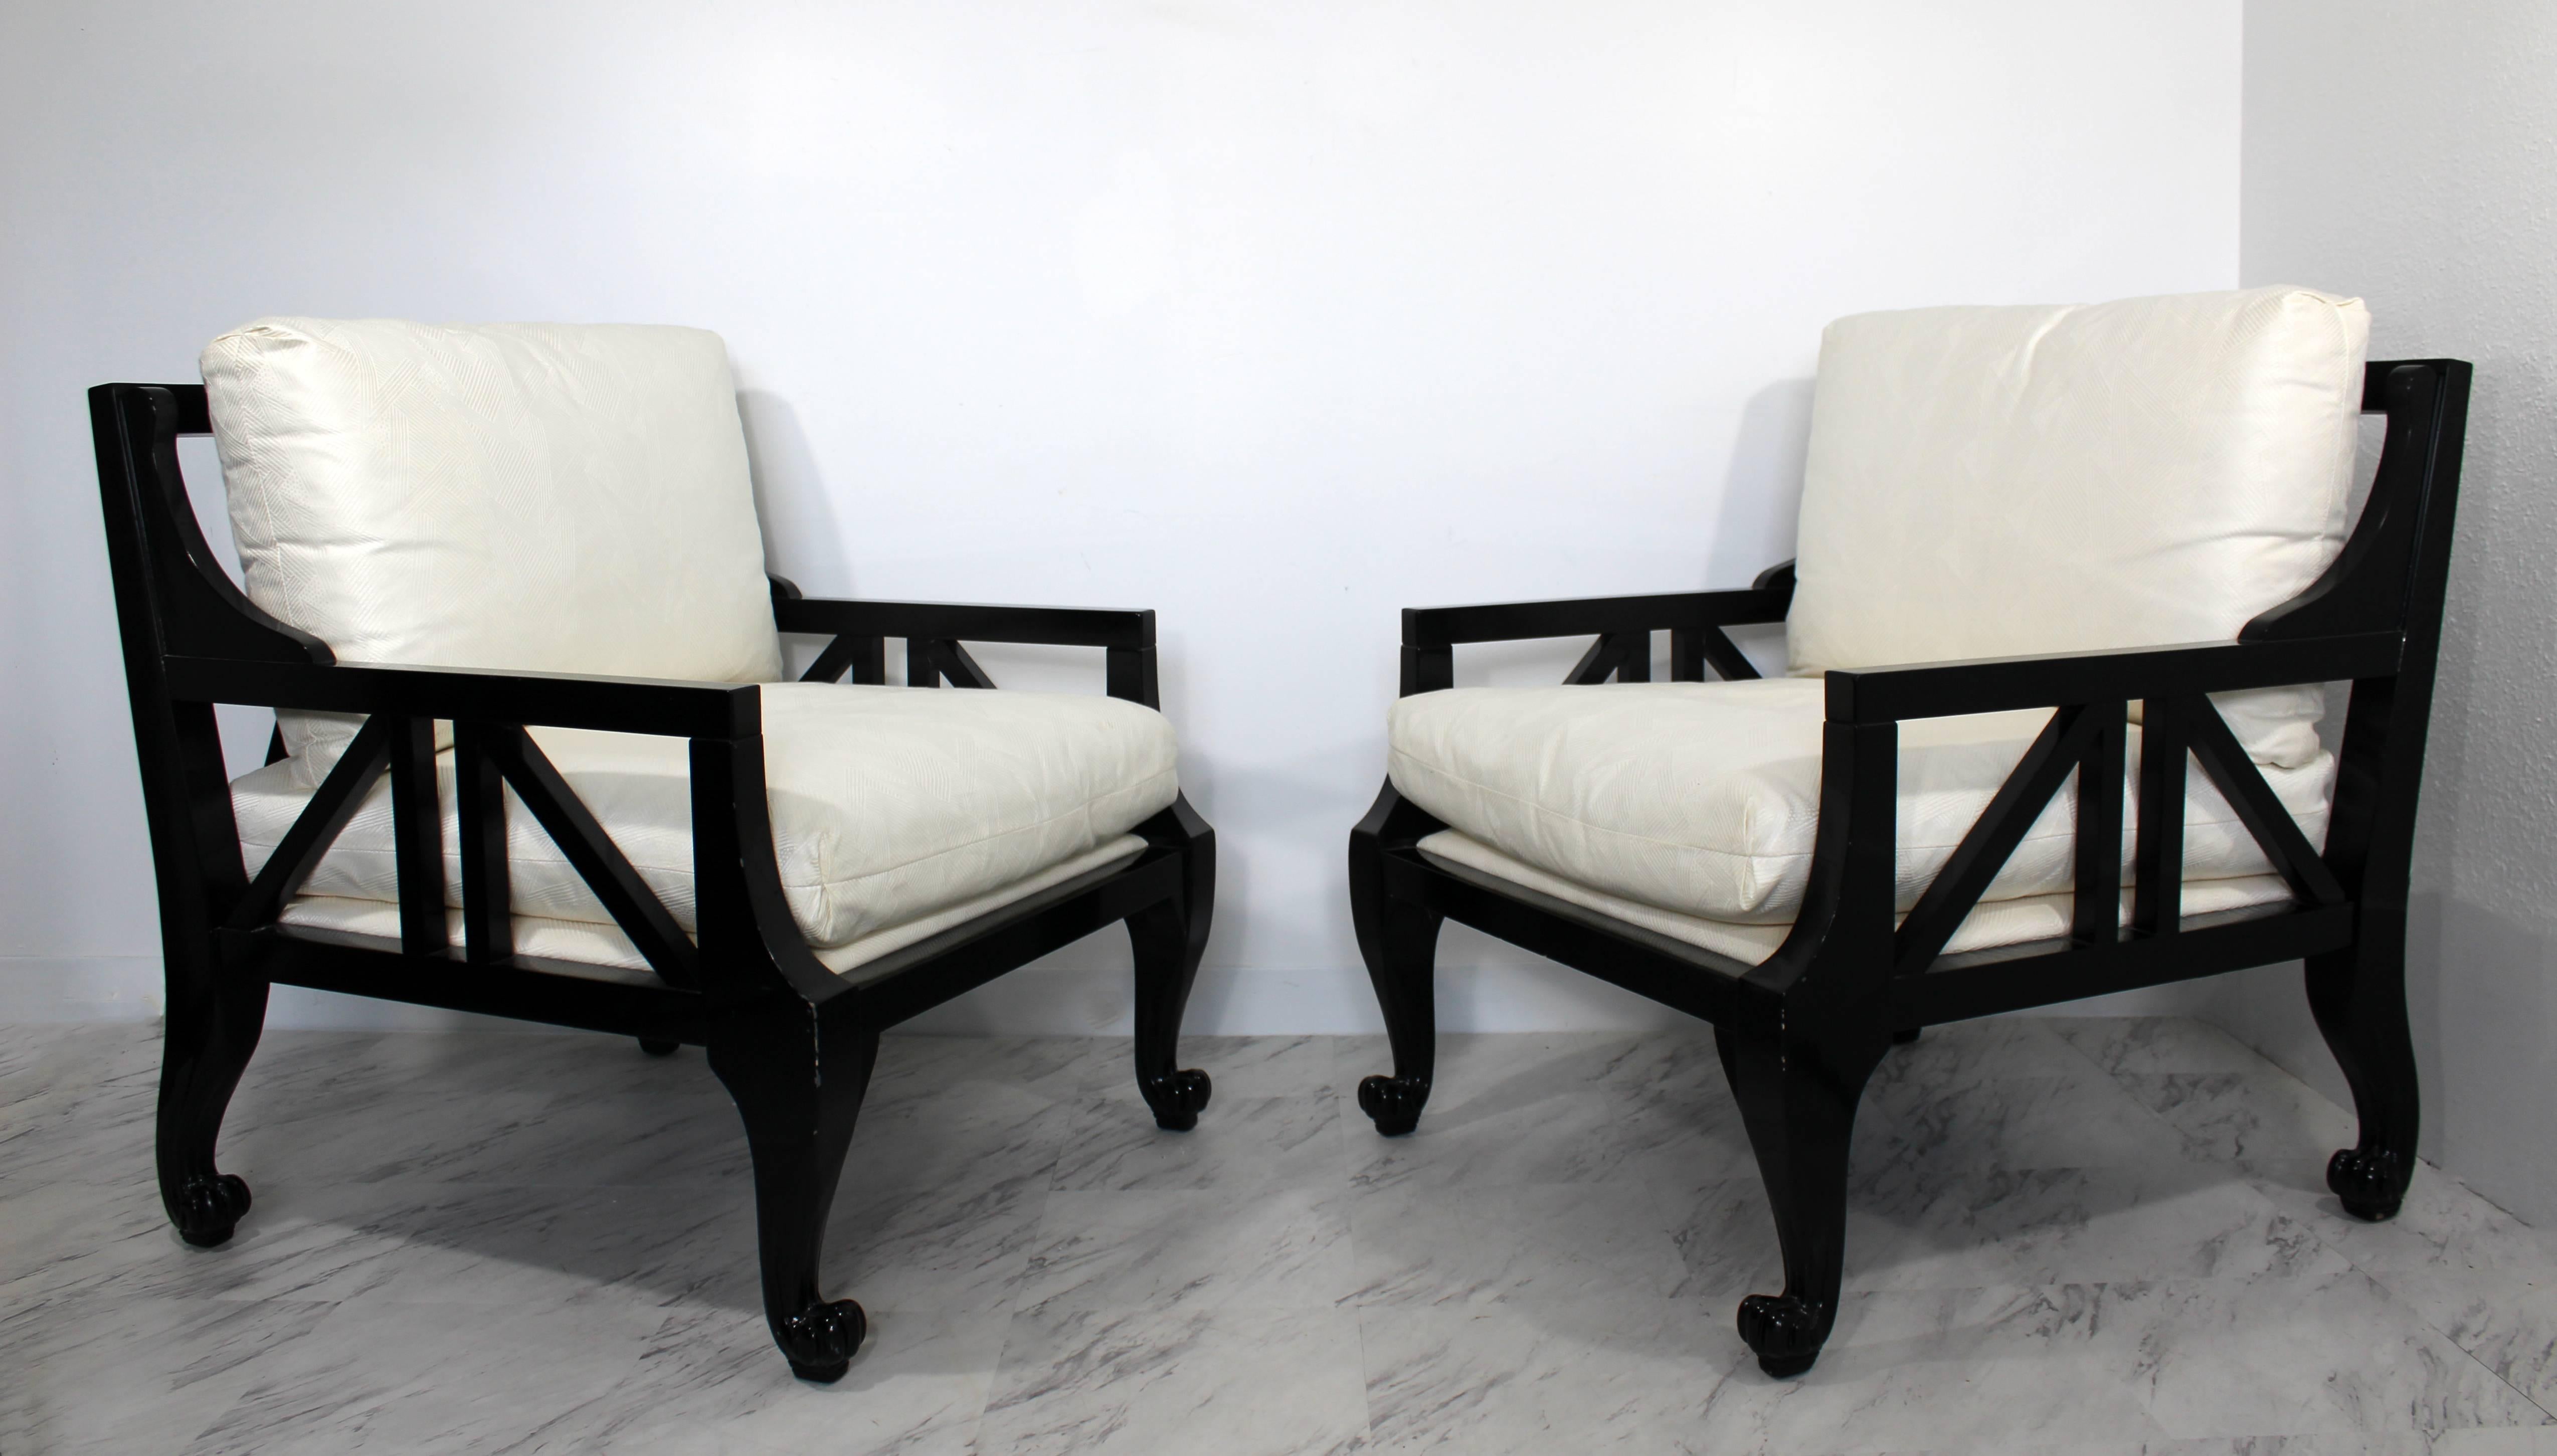 For your consideration is an incredible pair of black lacquer, oversized armchairs in the style of Barbara Barry for Baker. In very good condition. The dimensions are 30" W x 32" D x 32" B.H. x 19" S.H.